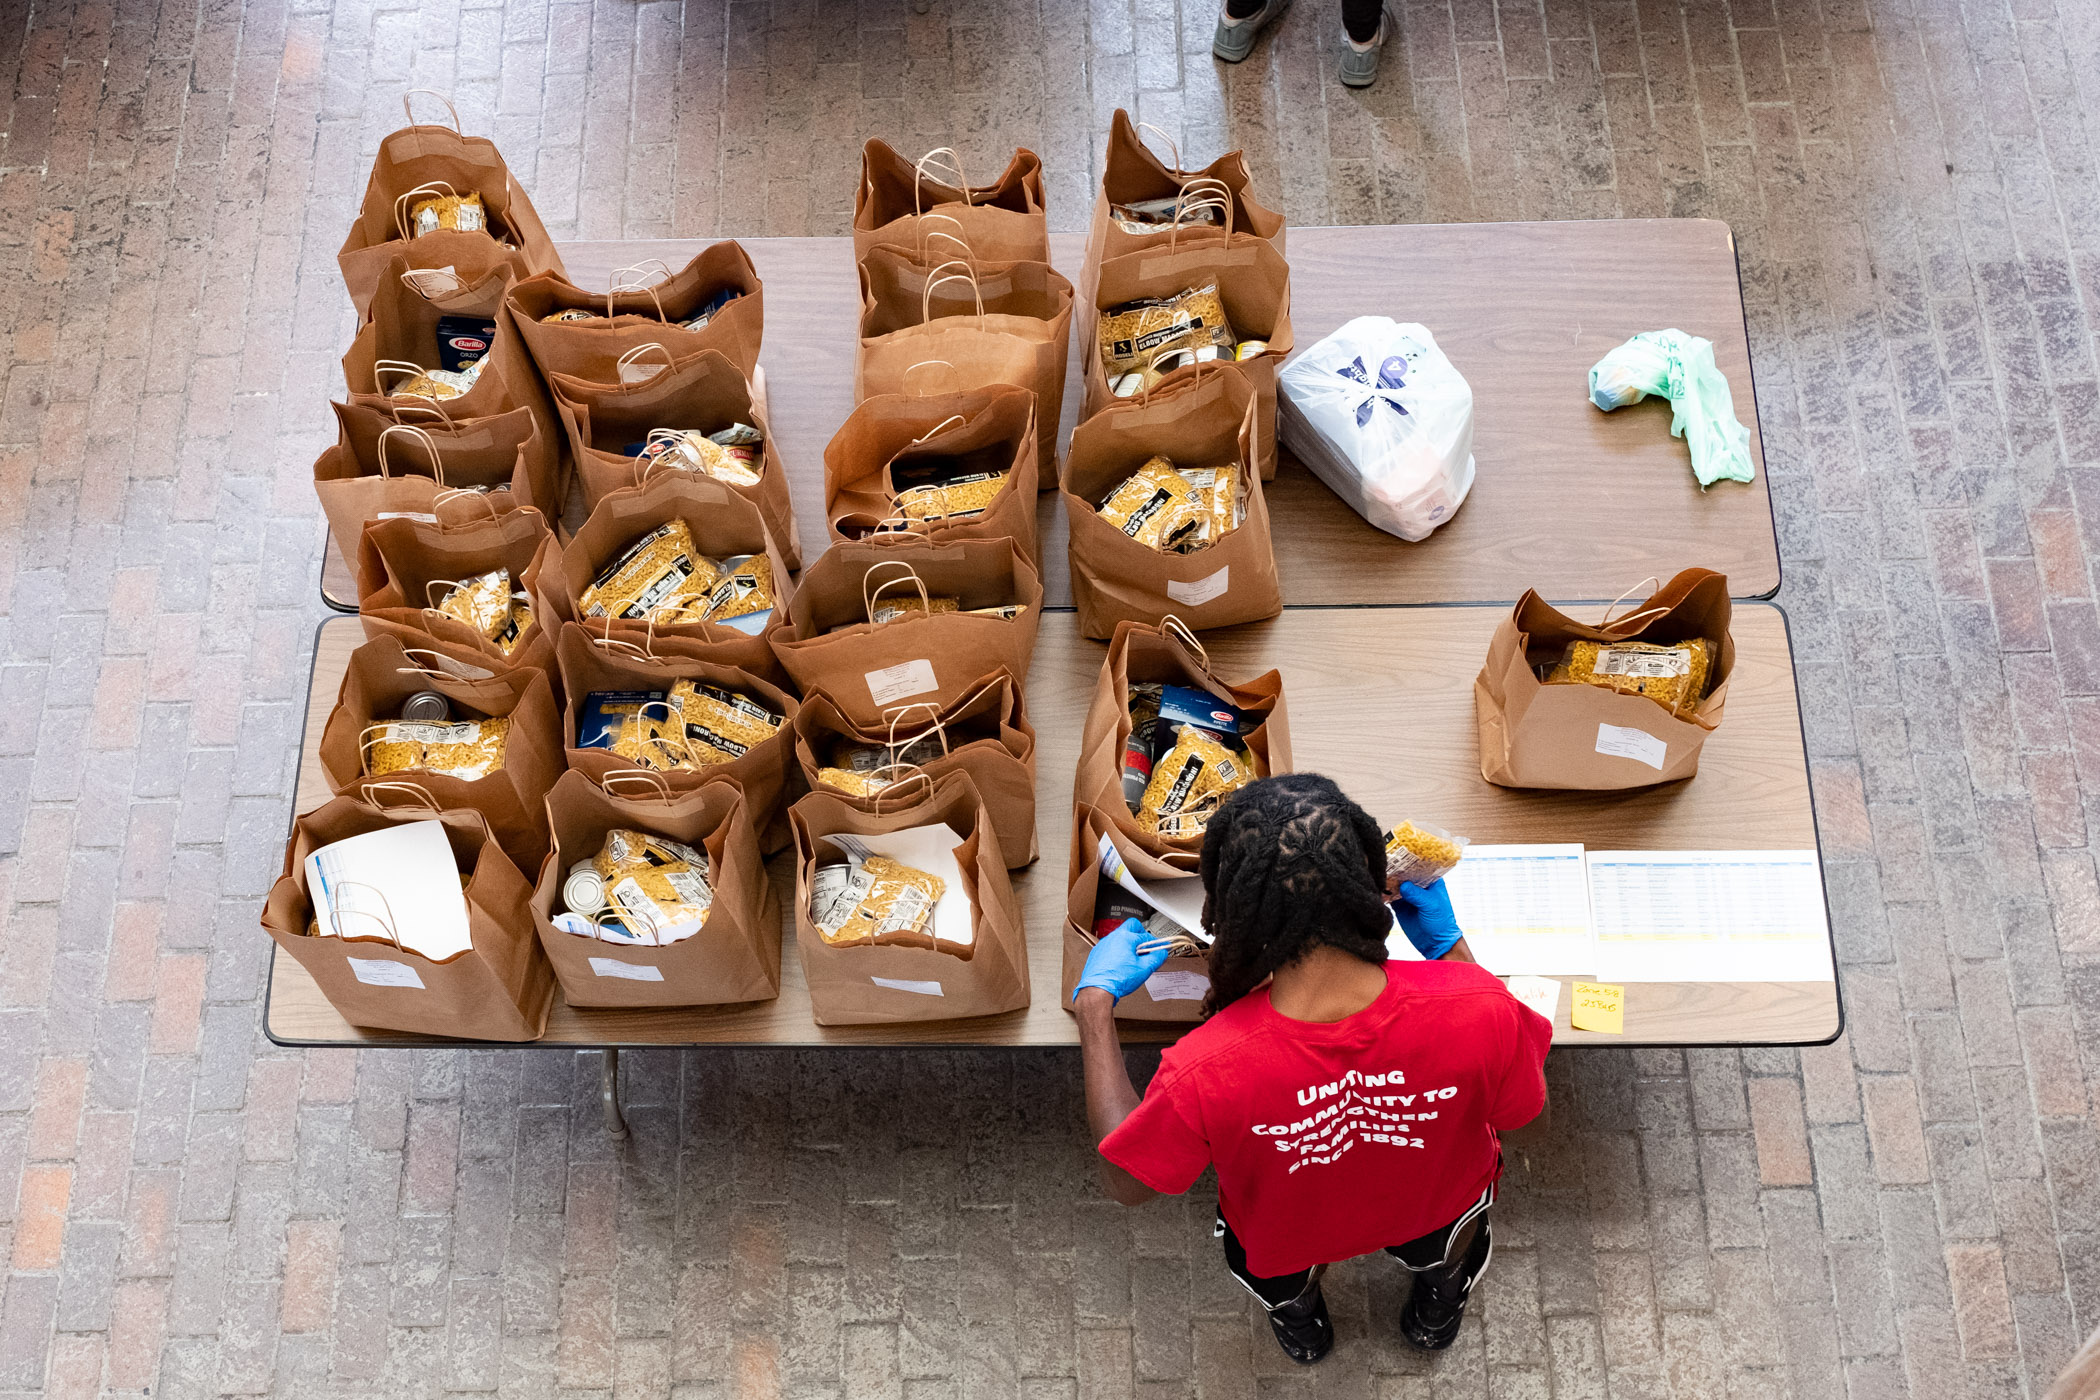 A USES employee is sorting bags of groceries for families